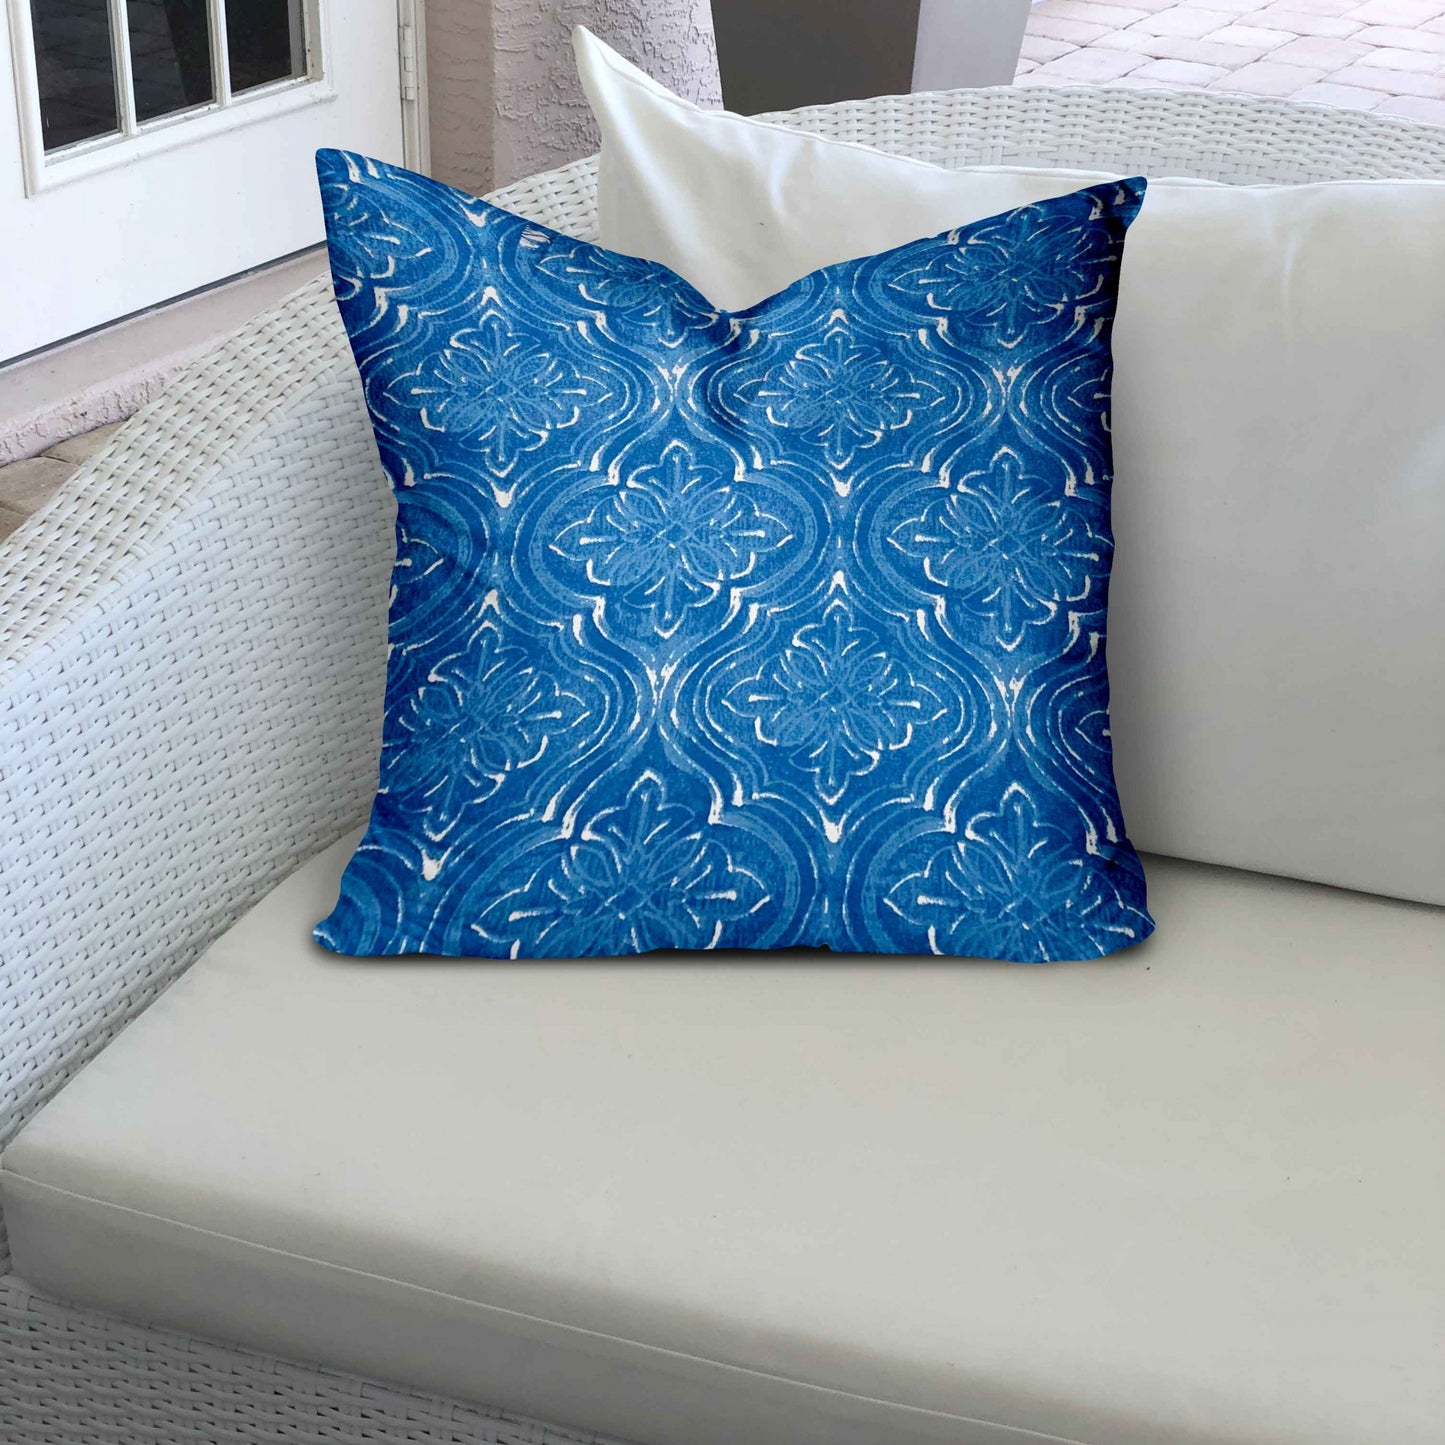 16" X 16" Blue And White Enveloped Ikat Throw Indoor Outdoor Pillow